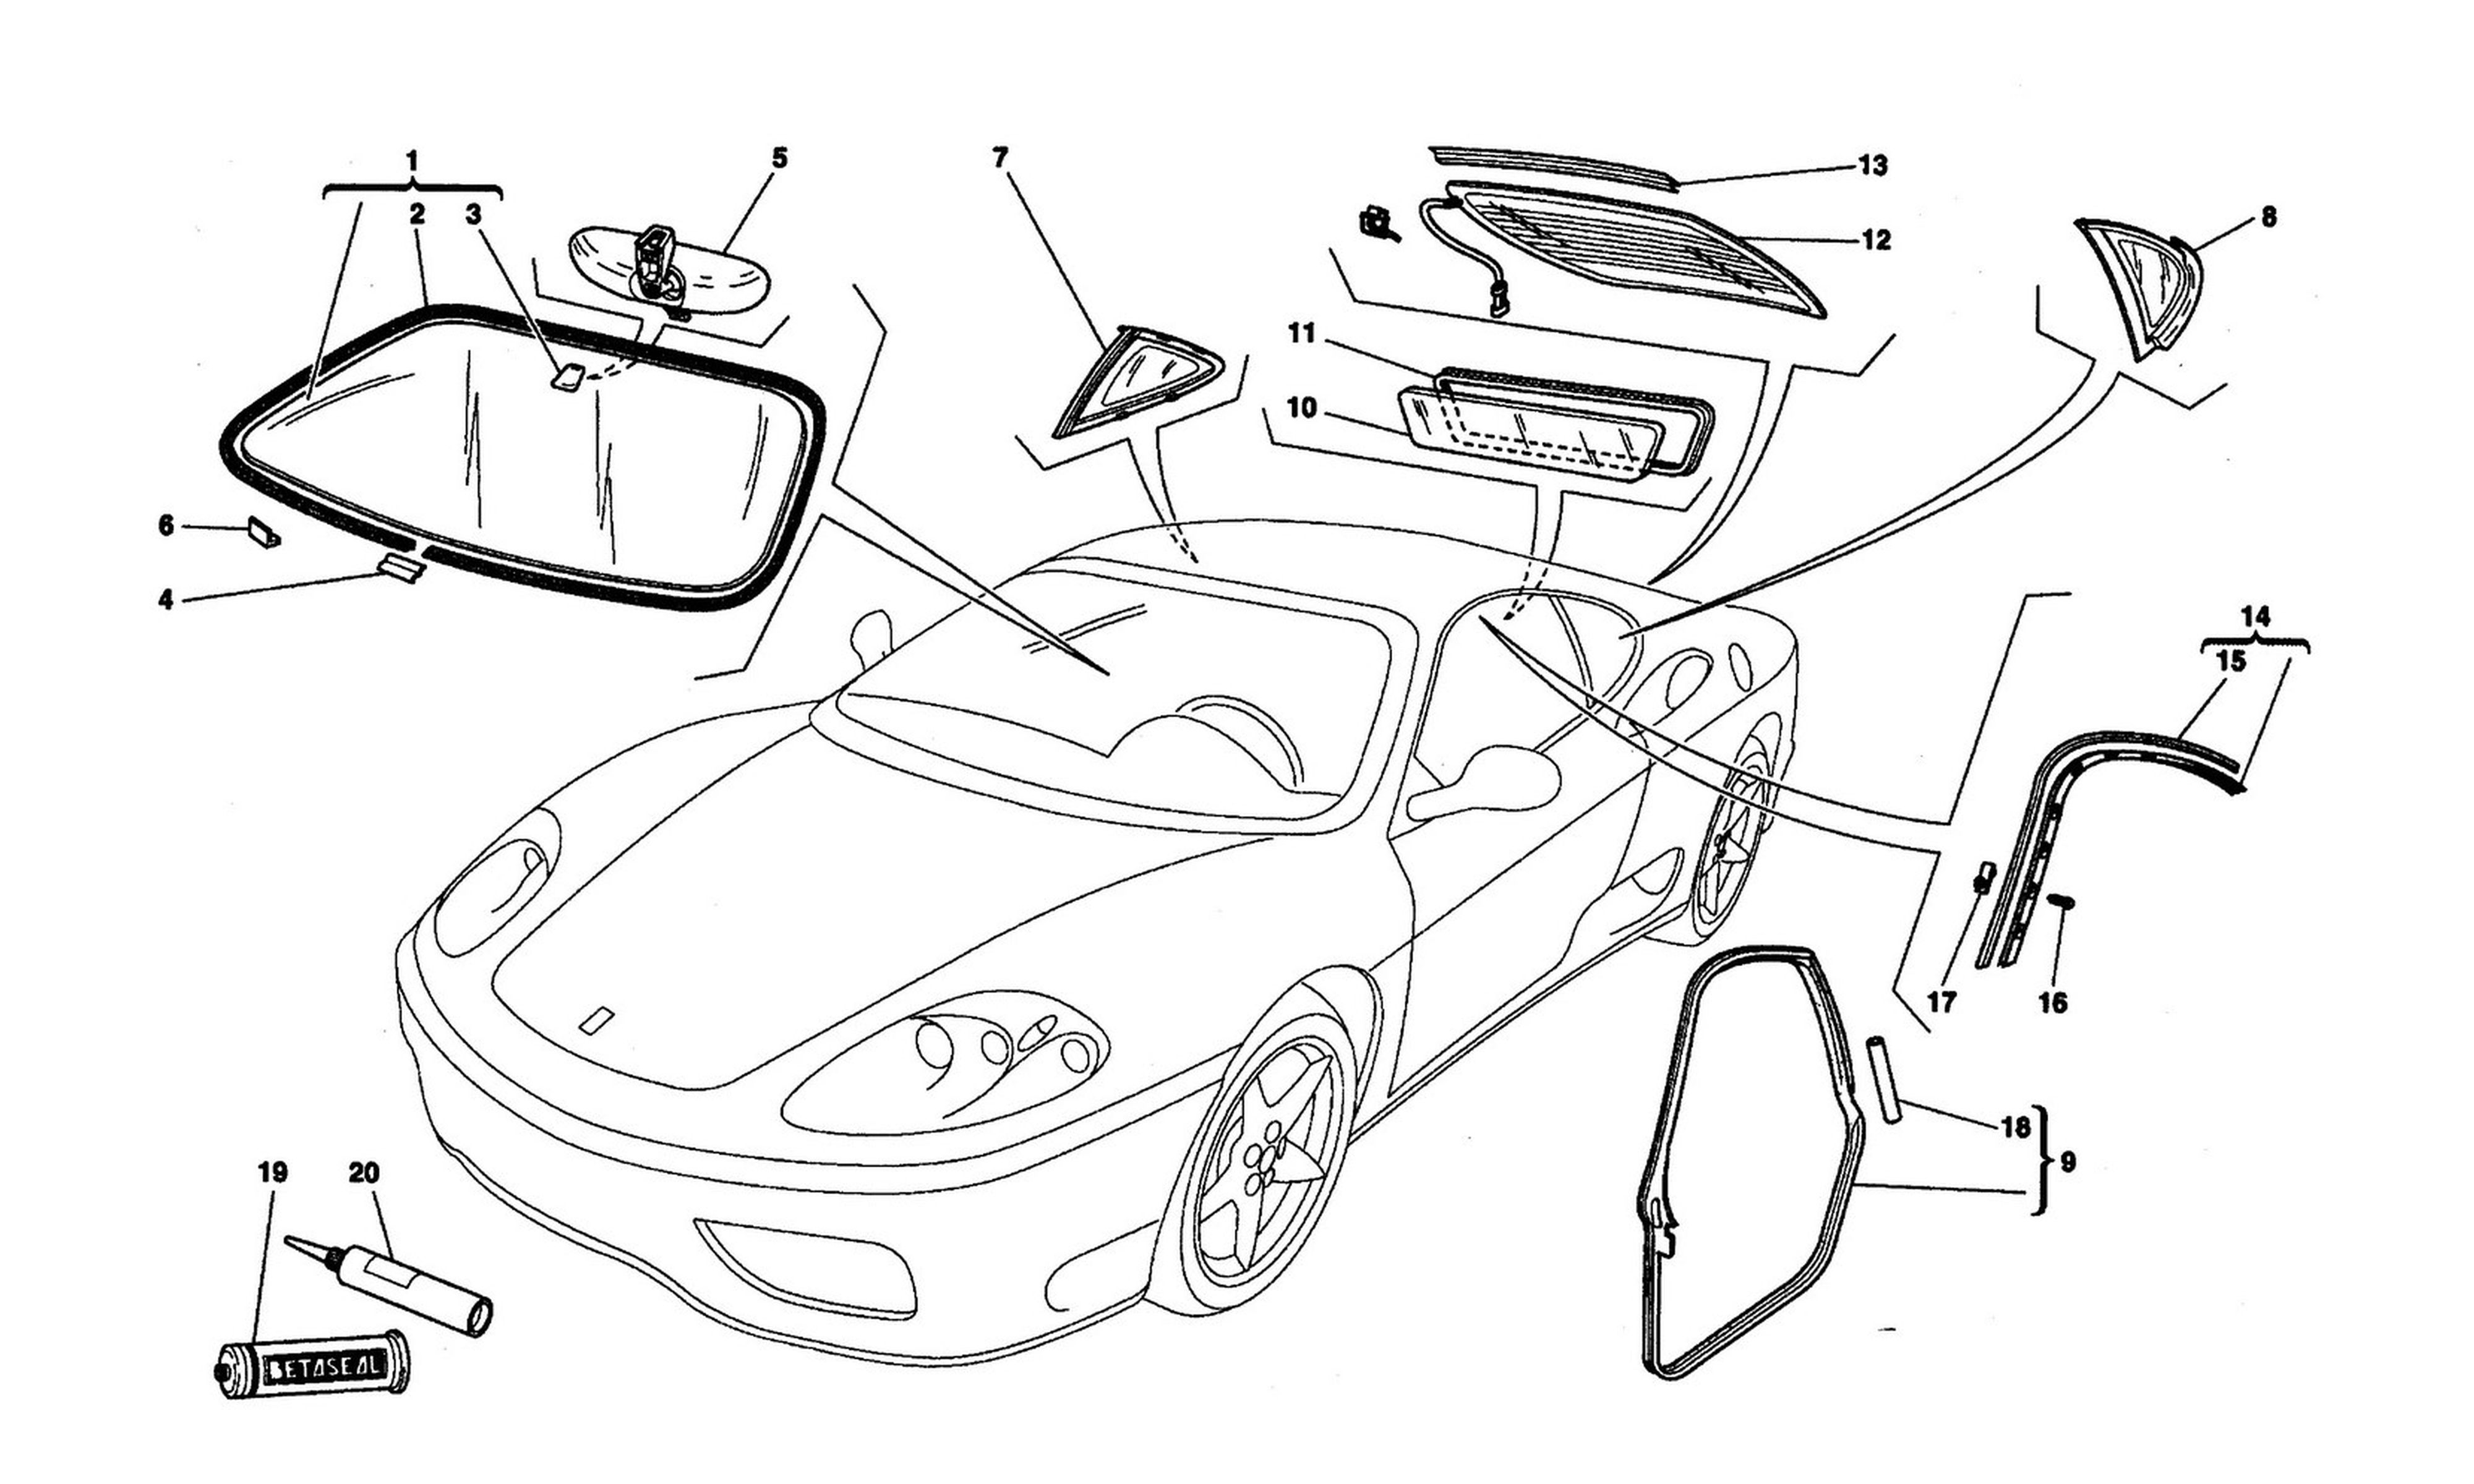 Schematic: Glasses And Gaskets